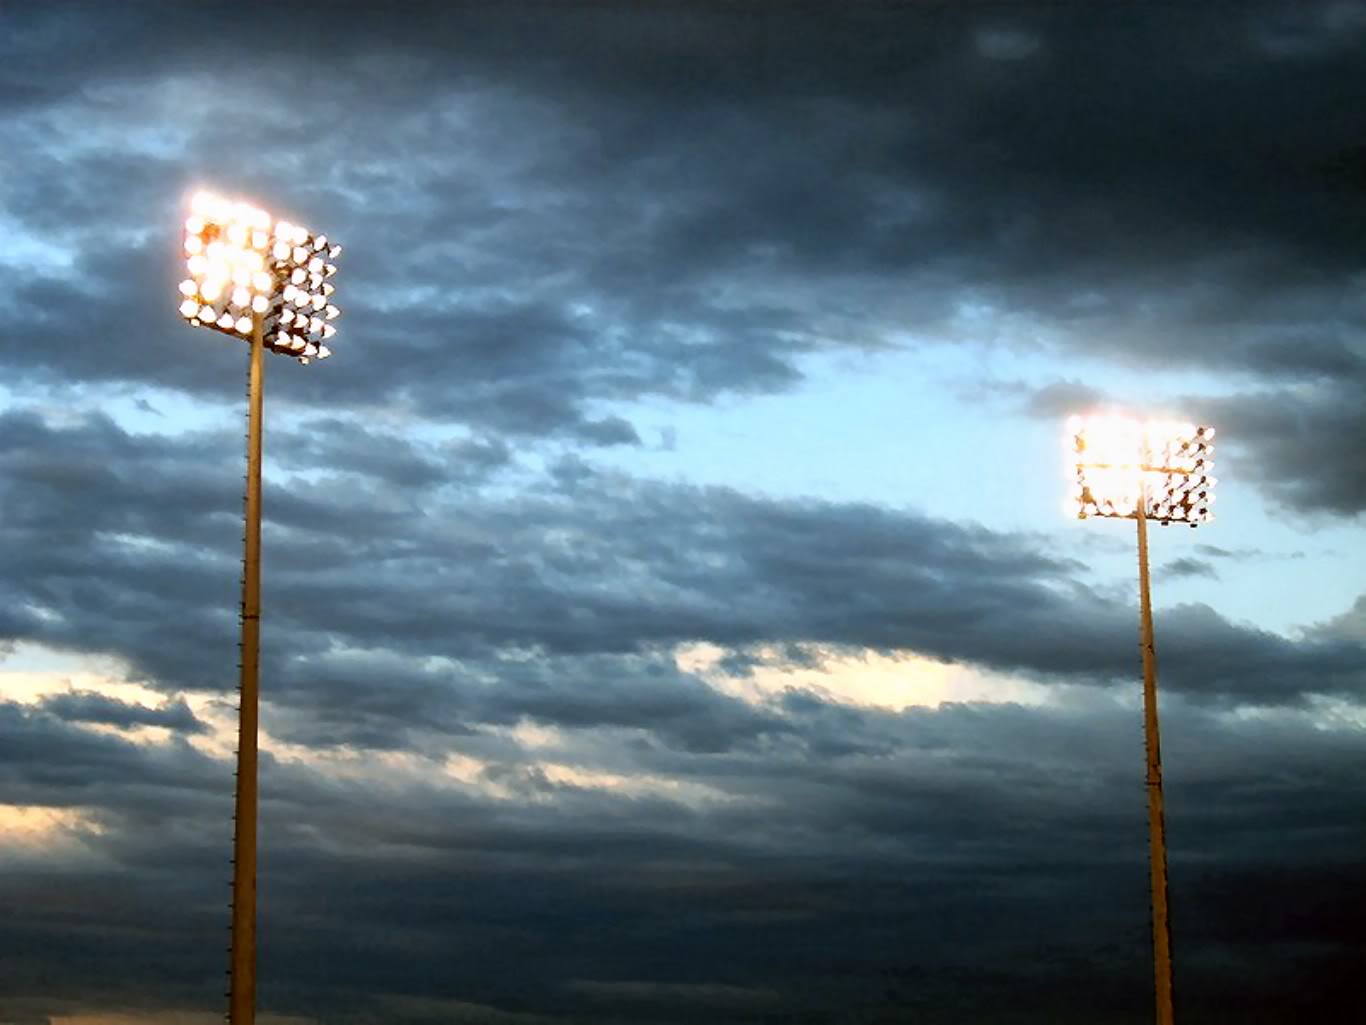 Friday Night Lights Backgrounds, Compatible - PC, Mobile, Gadgets| 1366x1025 px